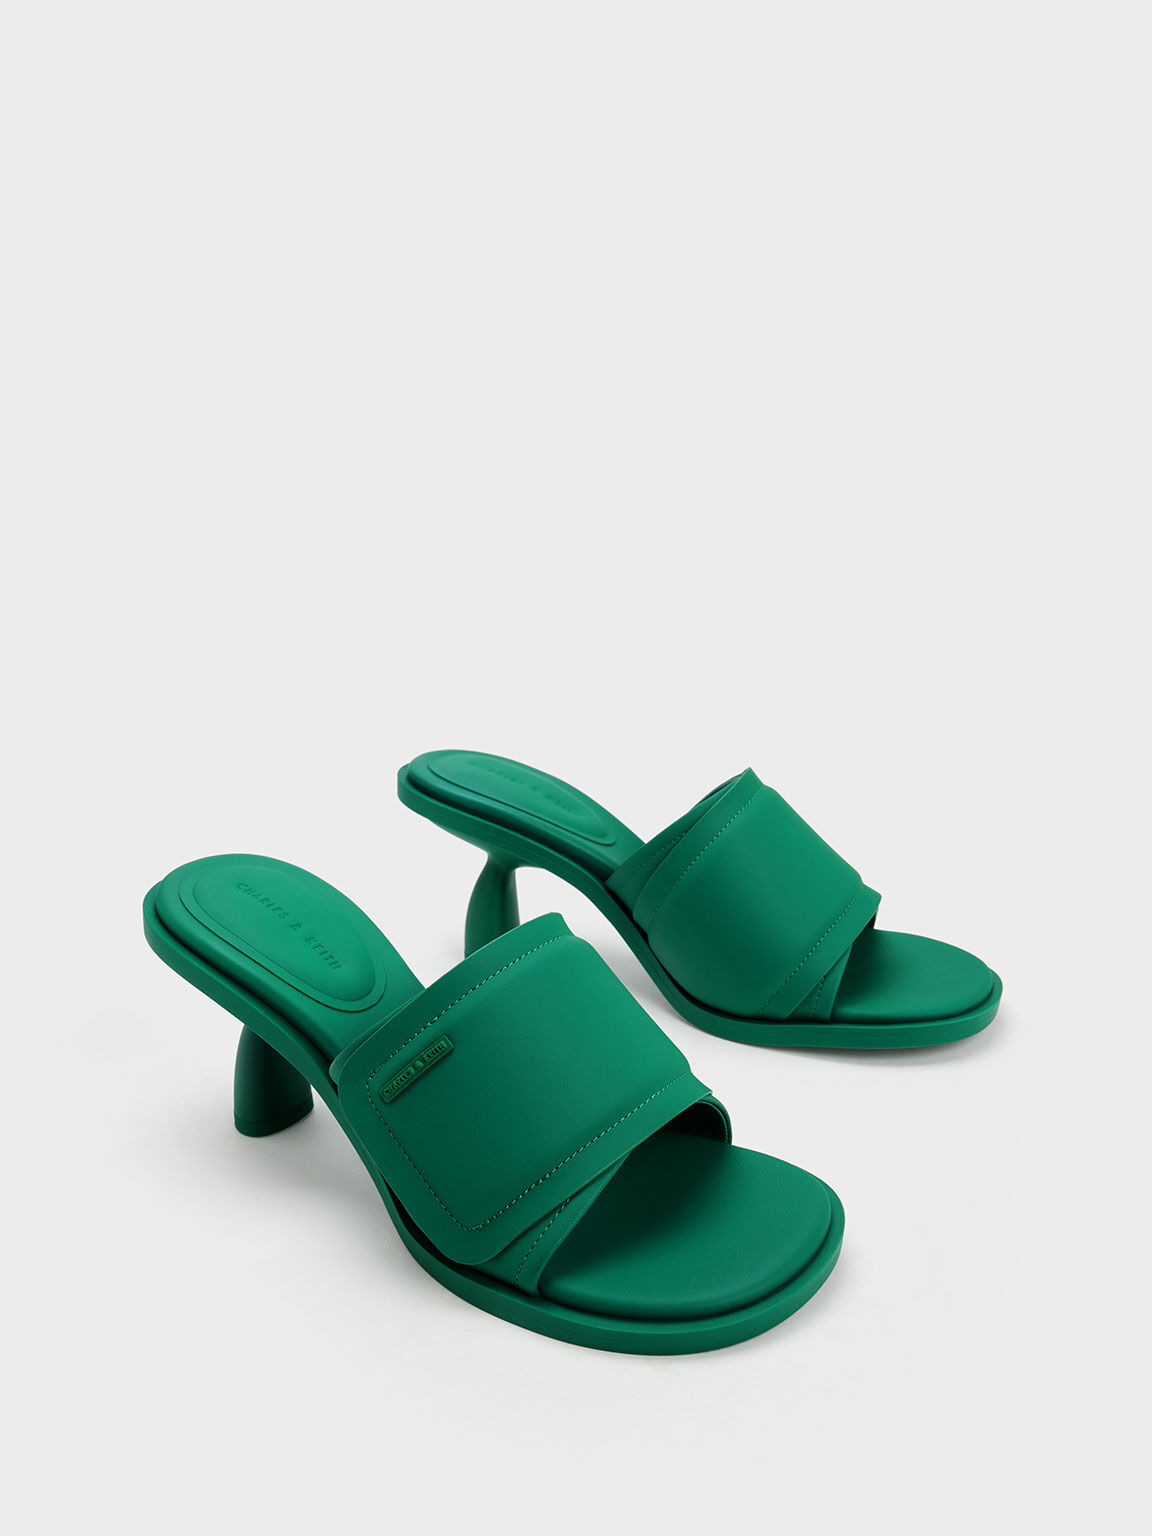 Green Puffy Sculptural Heel Mules - CHARLES & KEITH SG